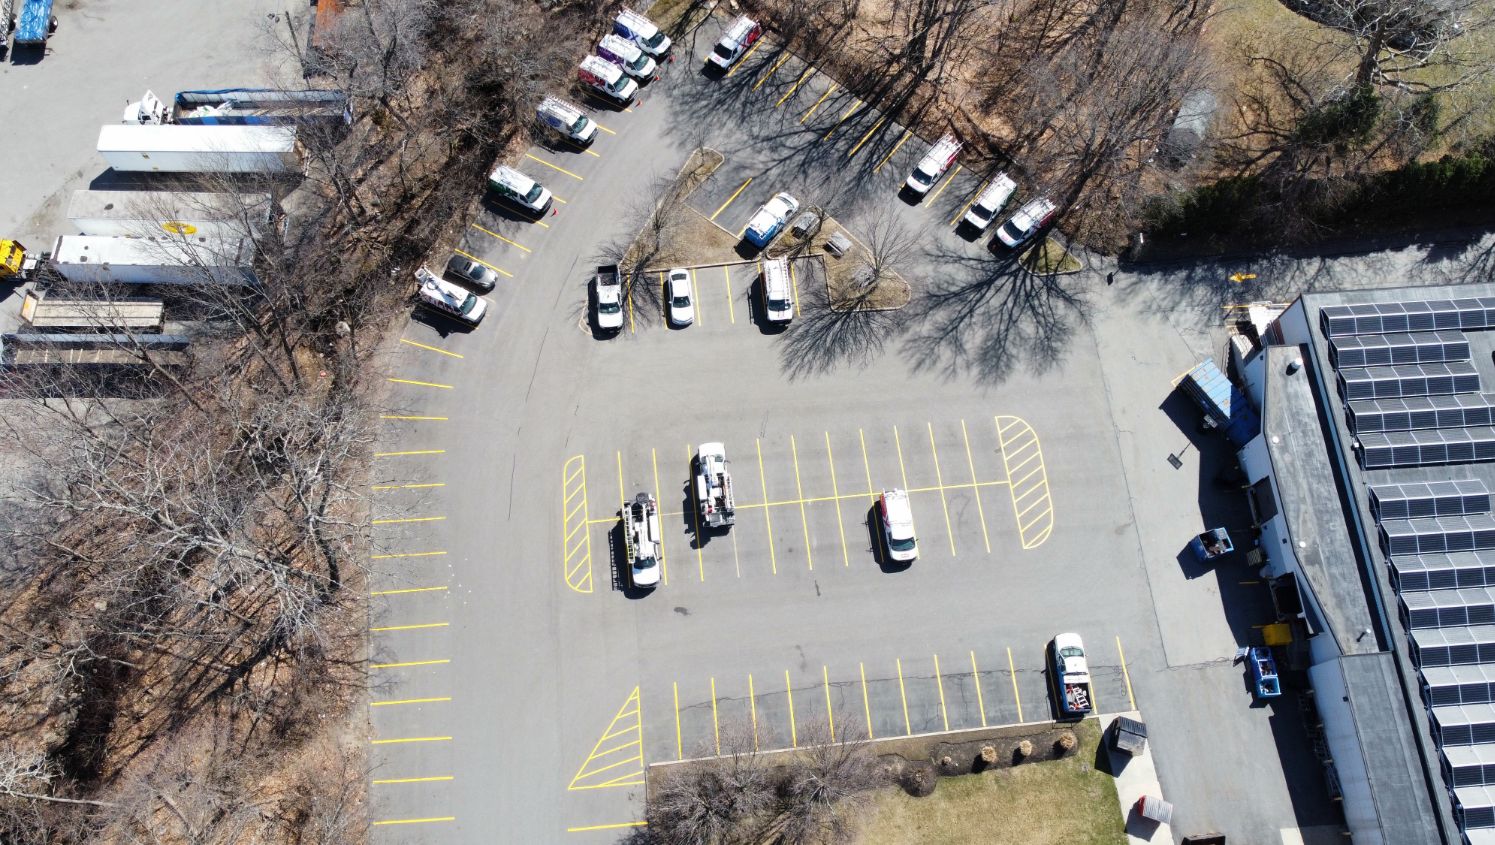 new parking lot striping in woburn, ma